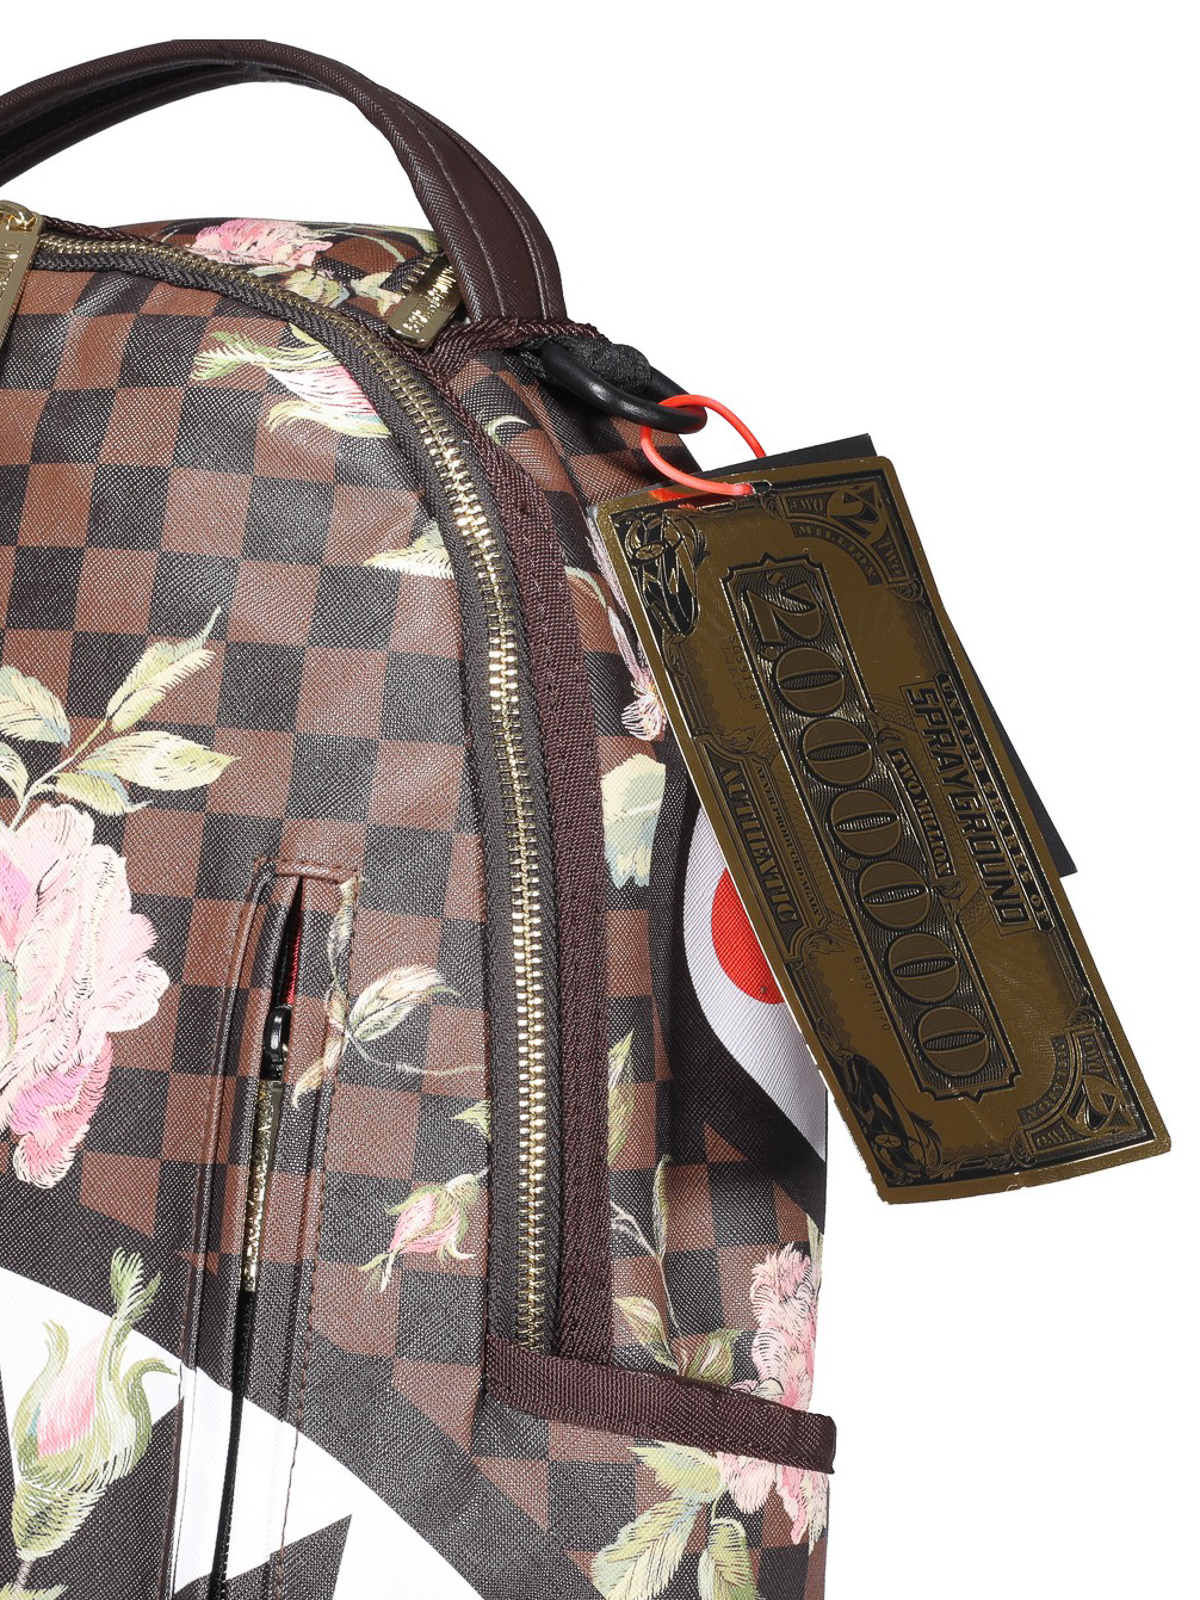 SPRAYGROUND: backpack in vegan leather with patch - Black